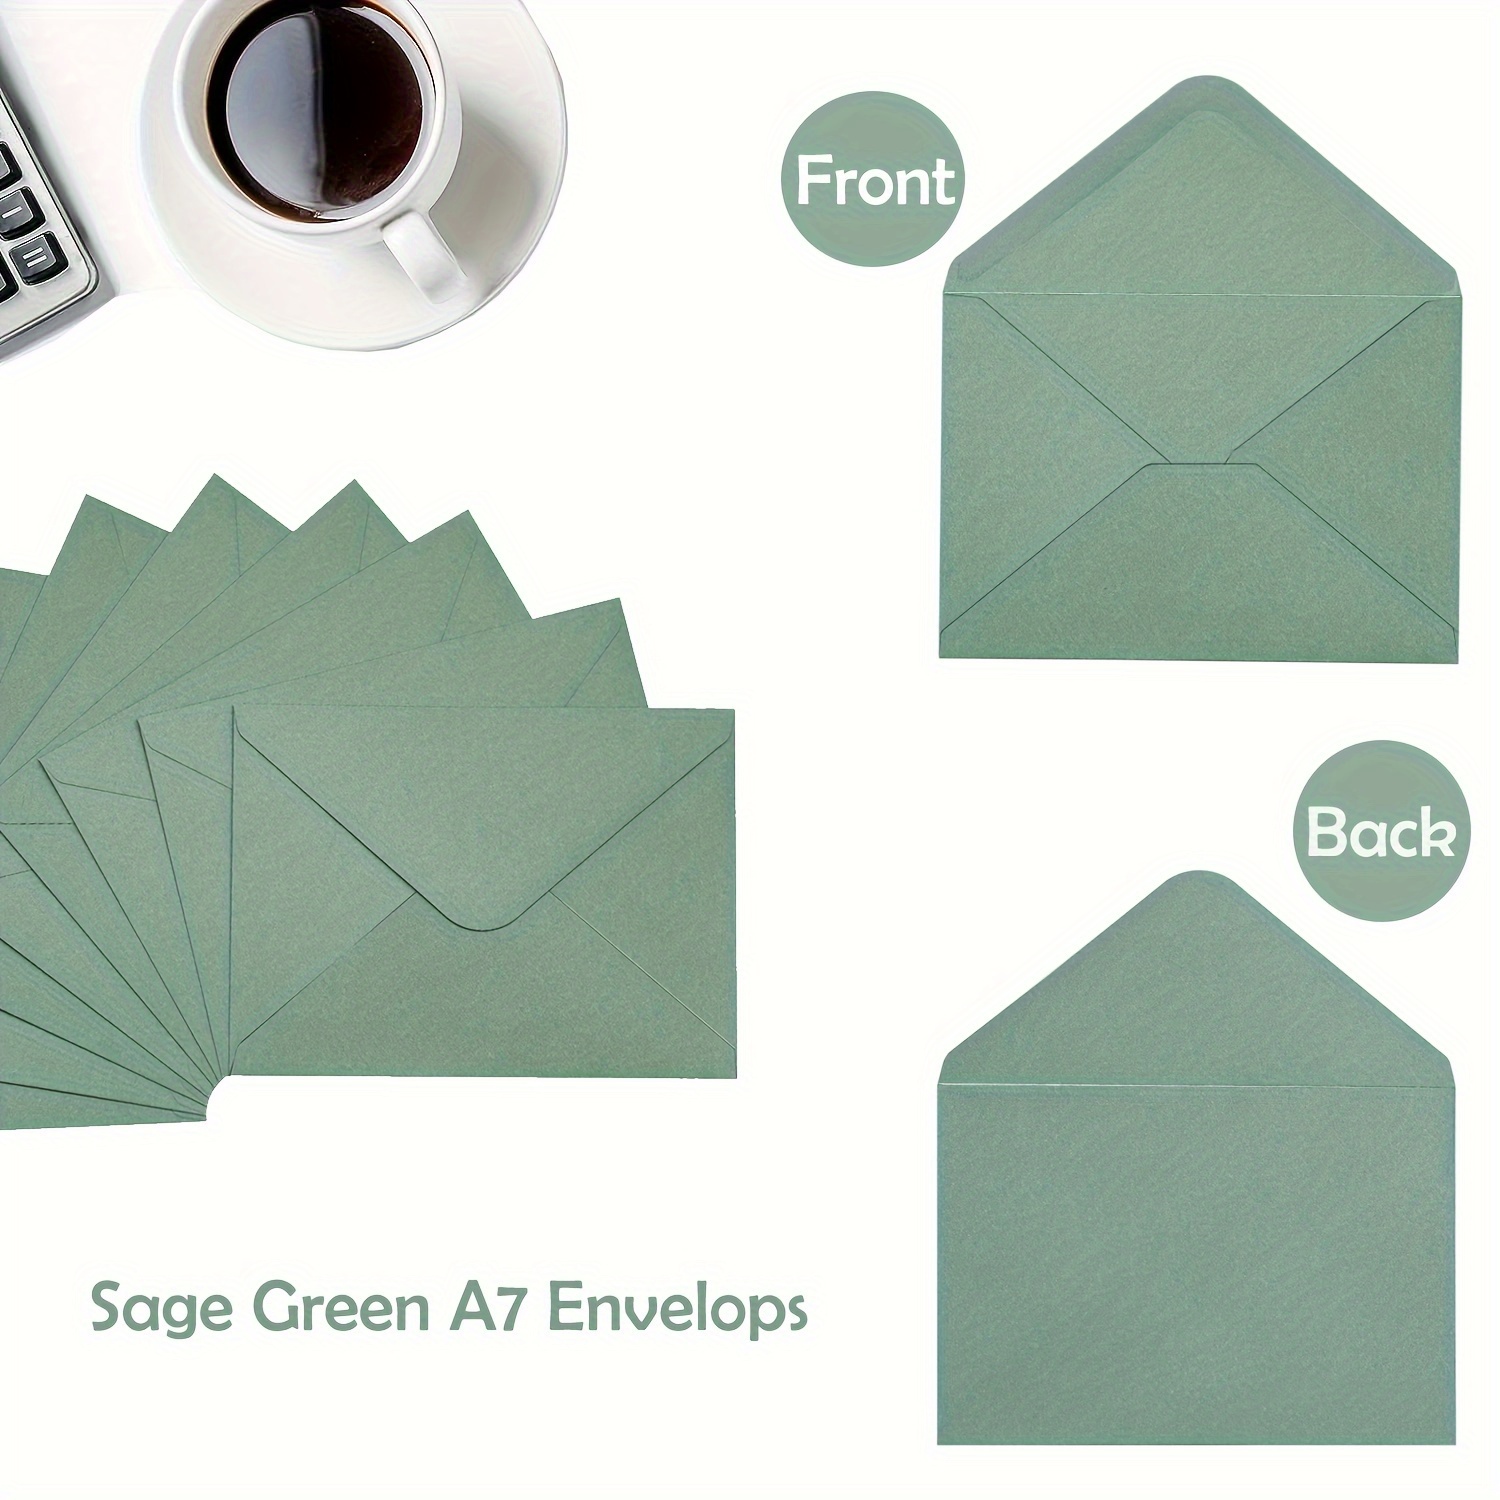 

50-piece Sage Green Self-seal A7 Envelopes 5"x7" - Perfect For Wedding Invitations, Thank You Cards, Birthday & Baby Shower Invites | V-flap Design, Matte Finish, Adhesive Closure